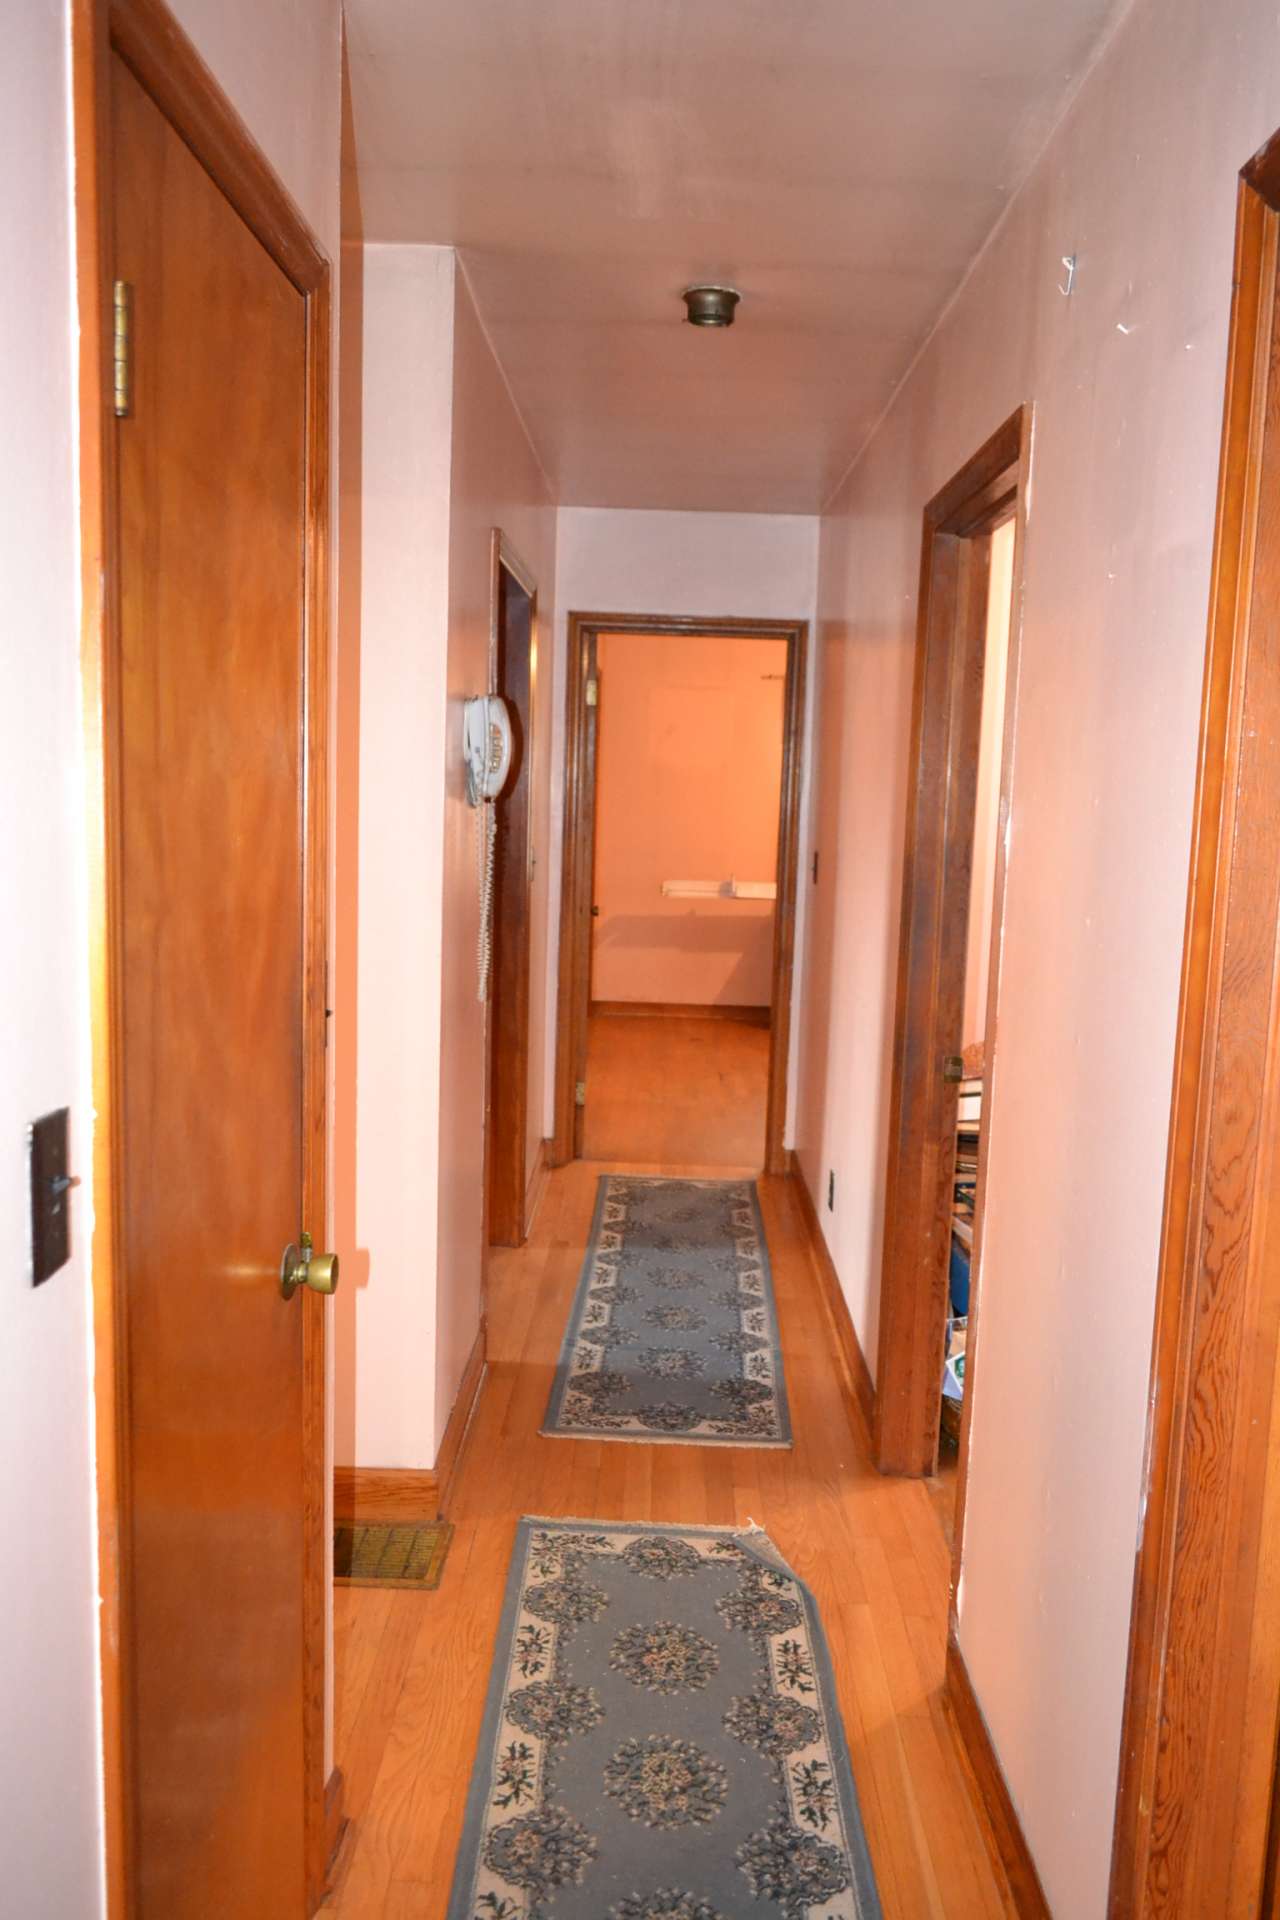 There are three bedrooms, all with hardwood floors.